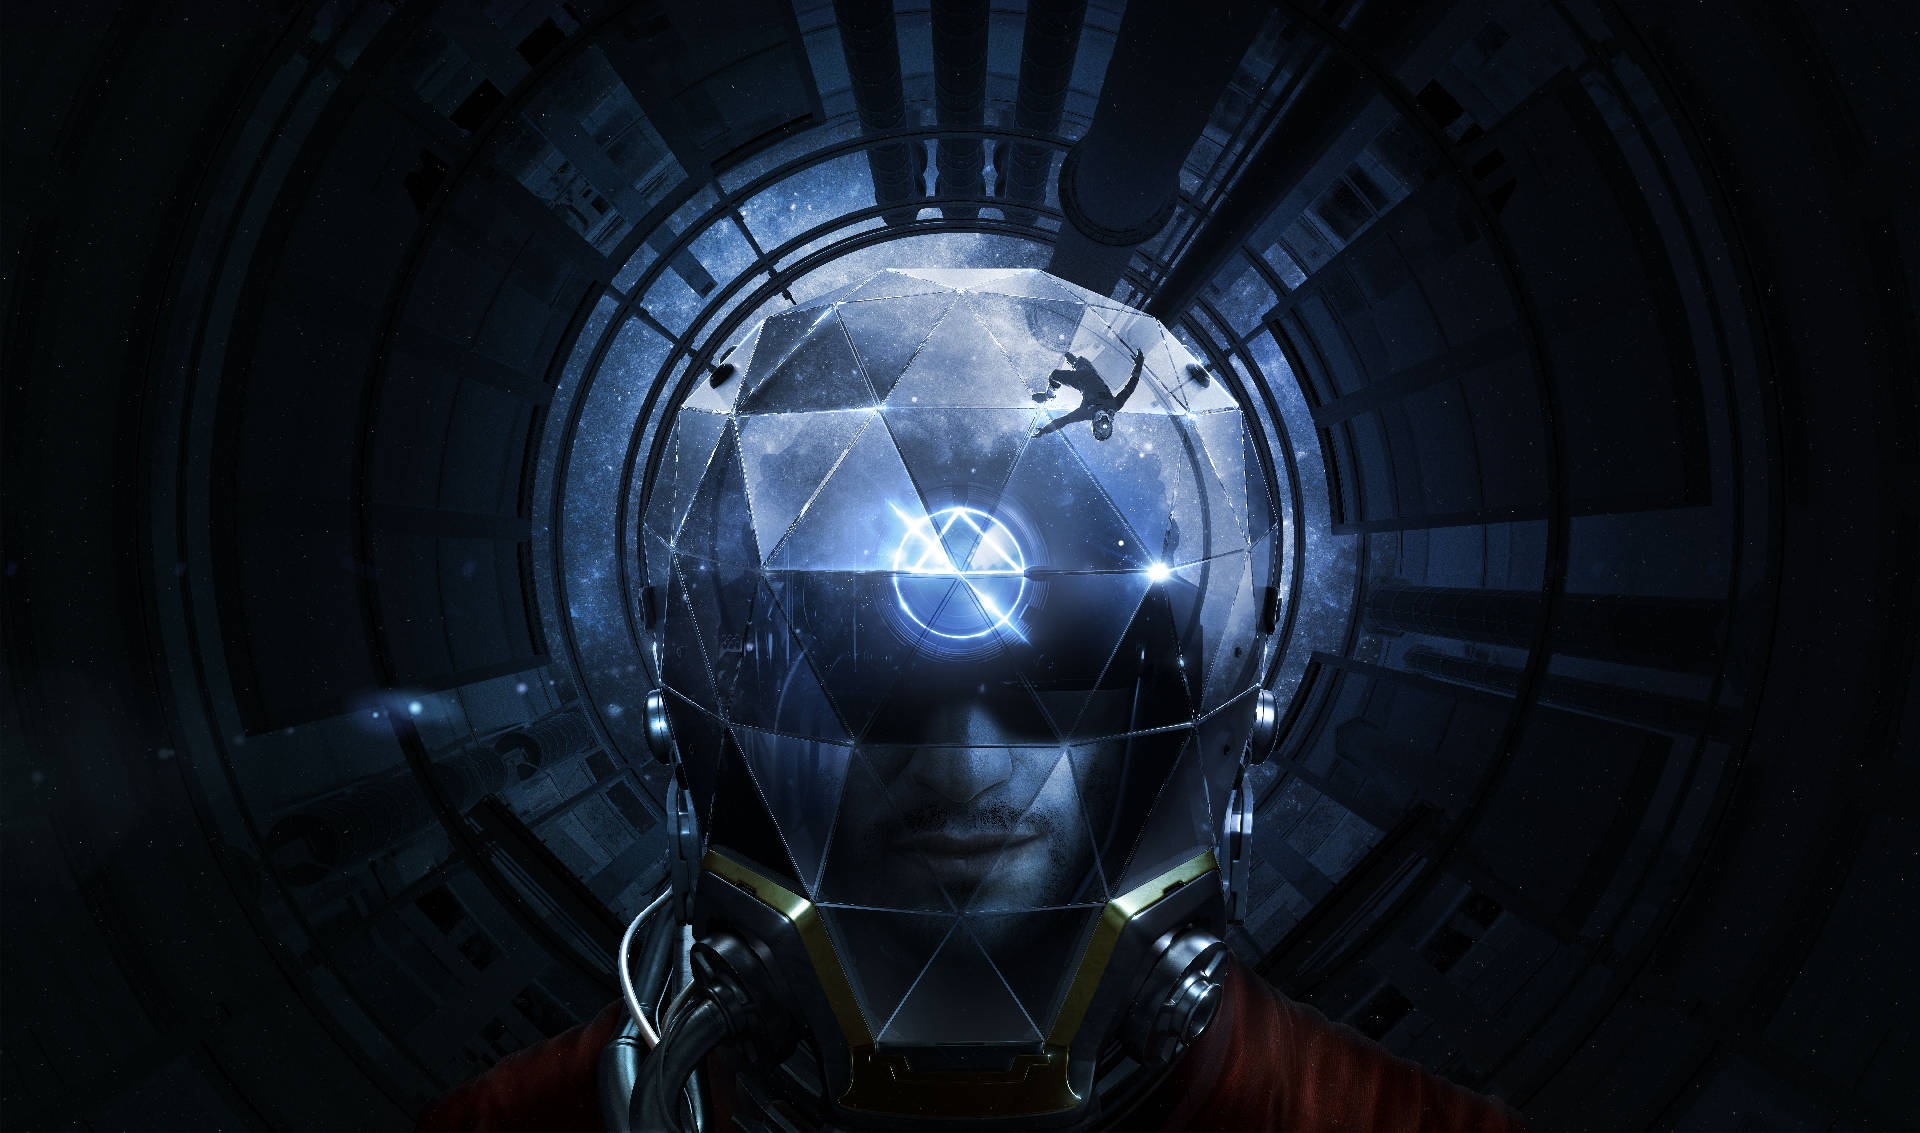 Uncover The Secrets Of The Unknown In Prey